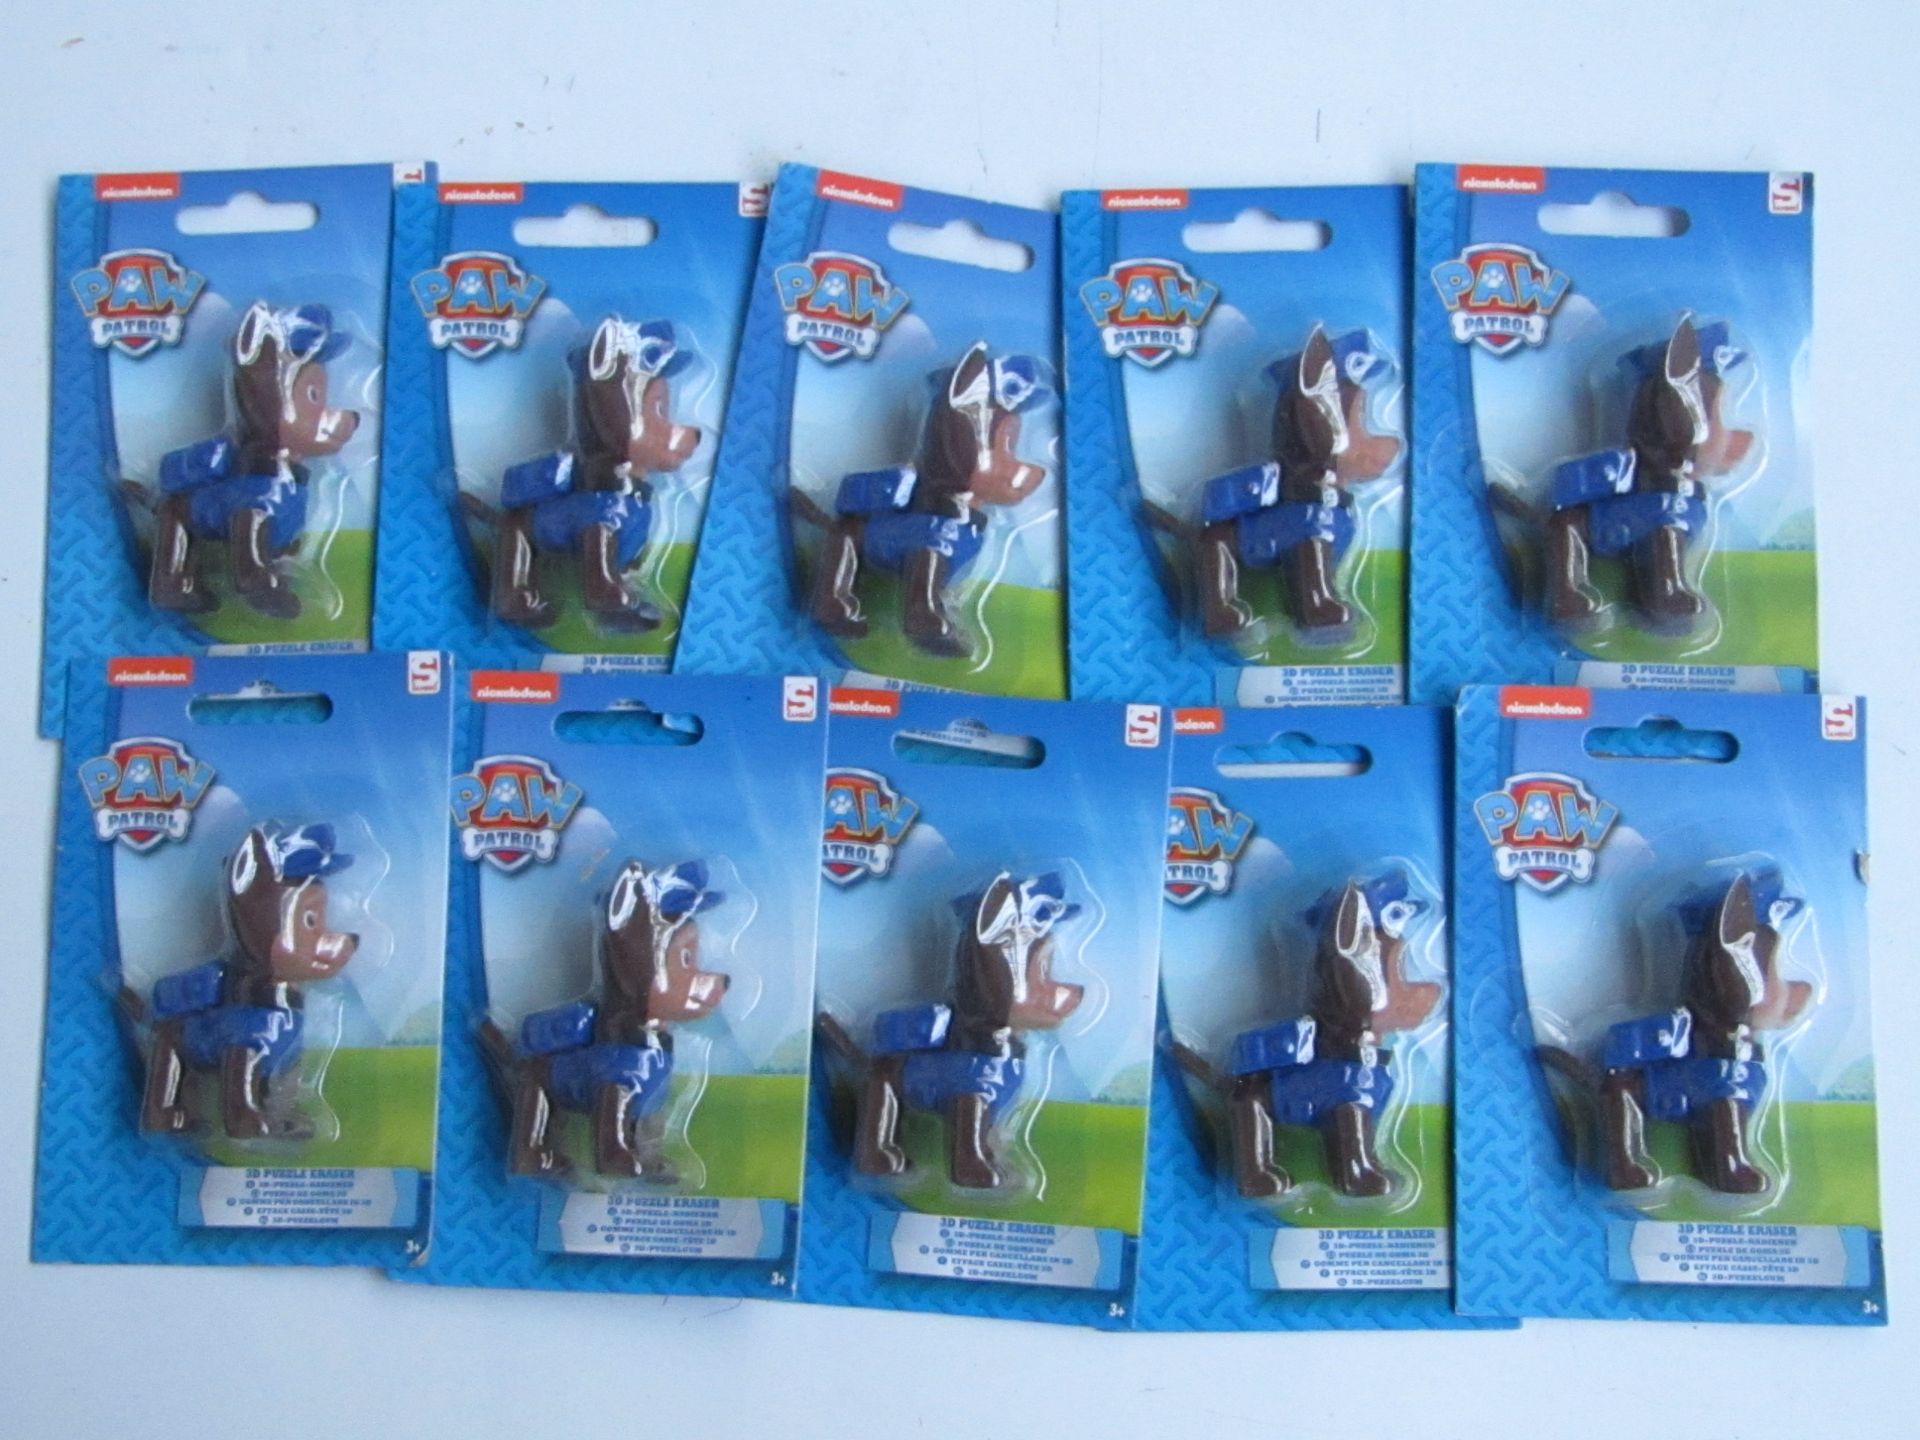 10x Paw Patrol 3D puzzle erasers, all new and packaged.